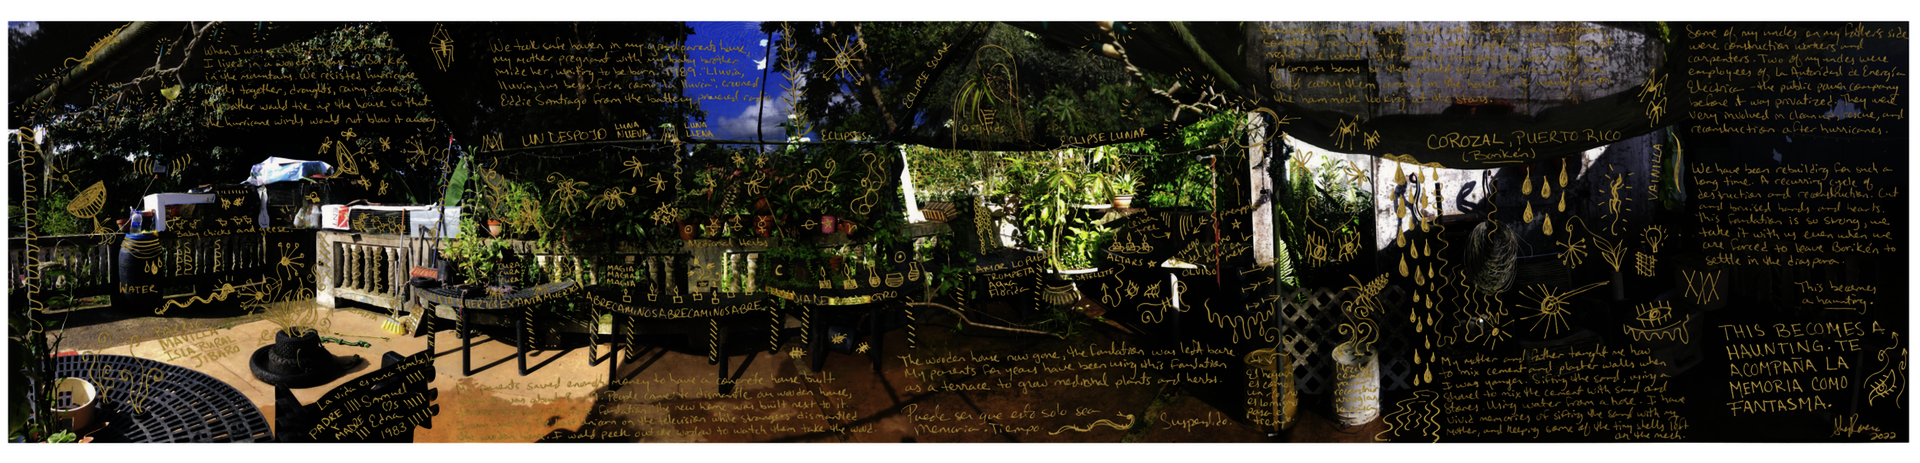 Digital landscape photograph of a terrace of a house in stilts in Puerto Rico, with a wild garden of medicinal herbs and cages with young fowl for animal husbandry. A place of Boricua specific forms of land tending and self sustainable farming. Digital print intervened with gold ink doodles and annotations. 2022. 